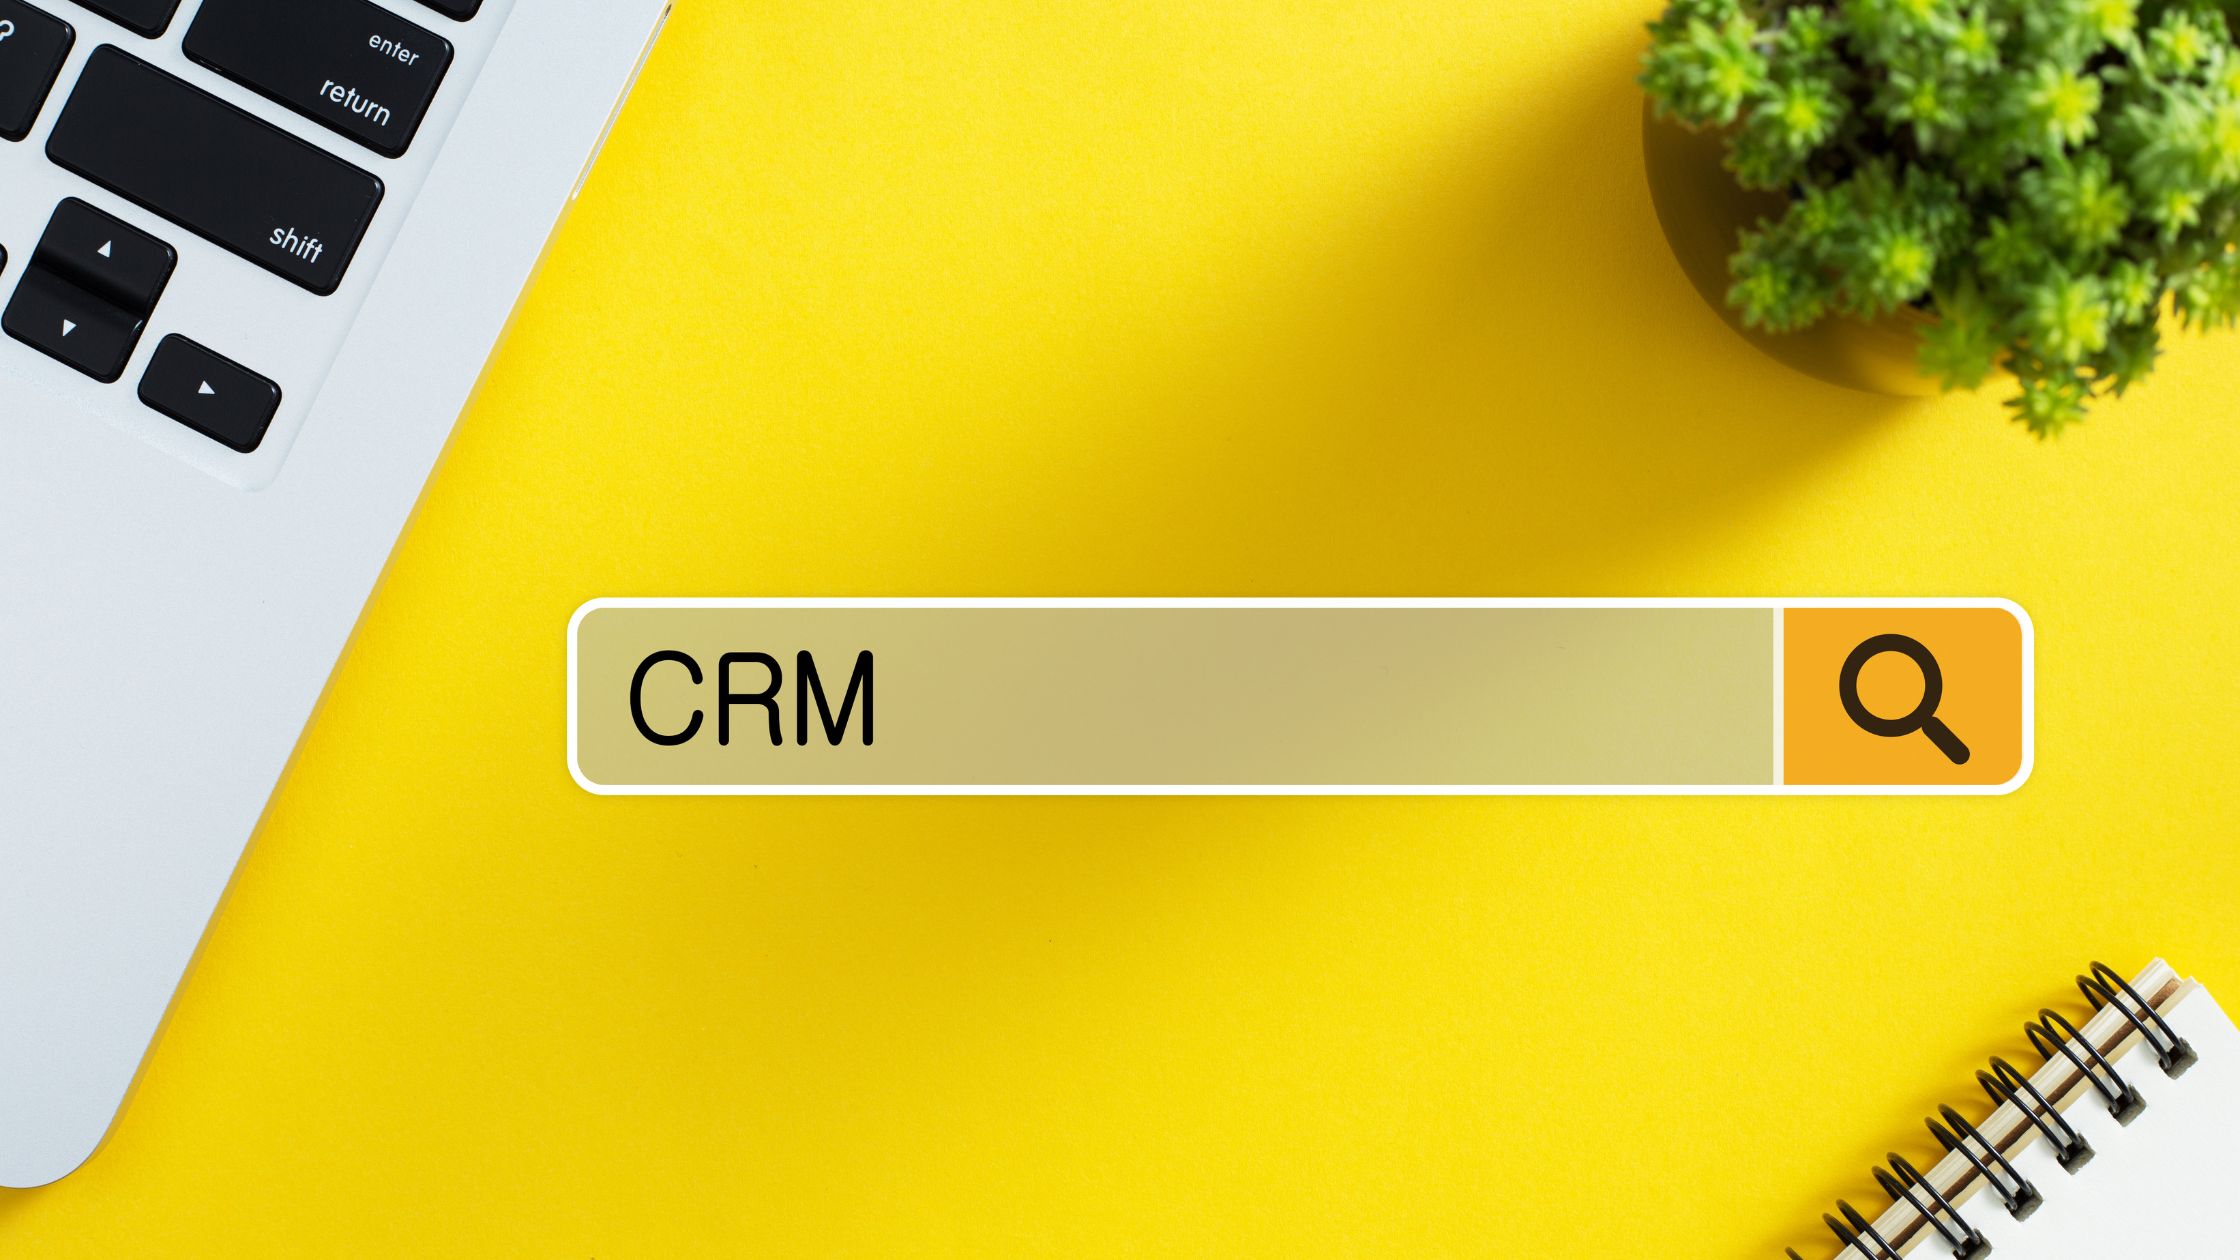 Top Marketing Tools To Boost Your Business - CRM